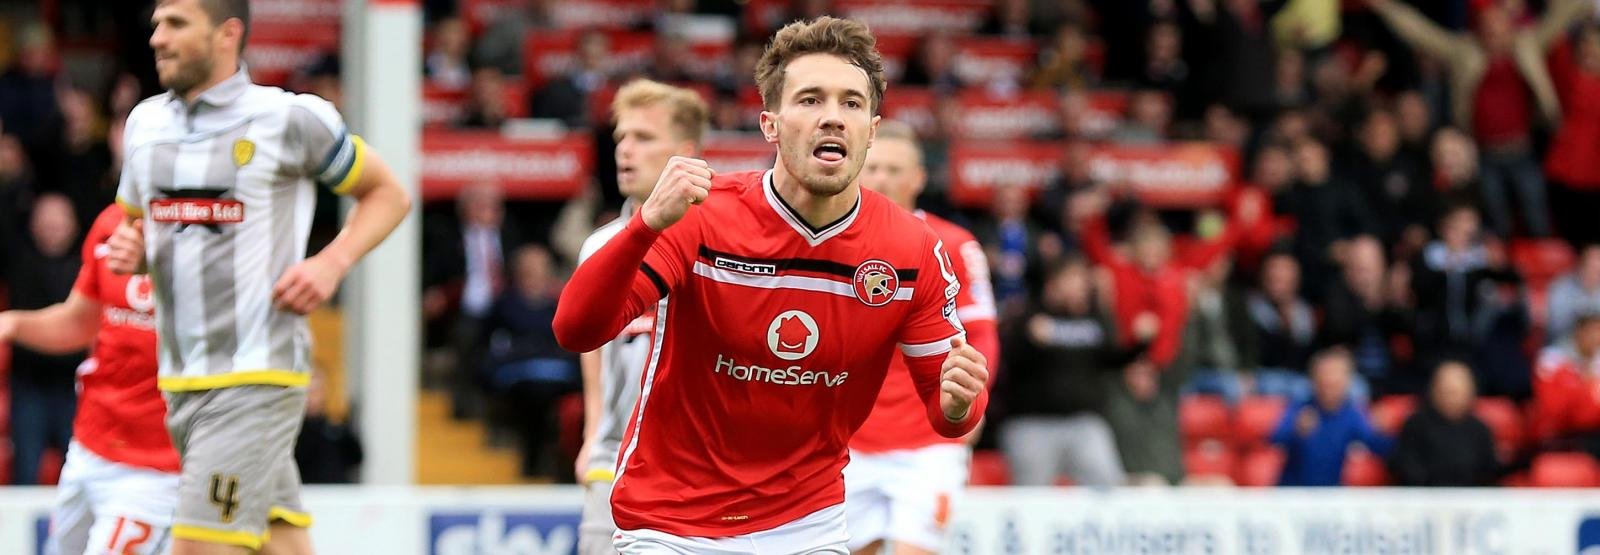 Round-up: League One – Walsall stun Gills to go top